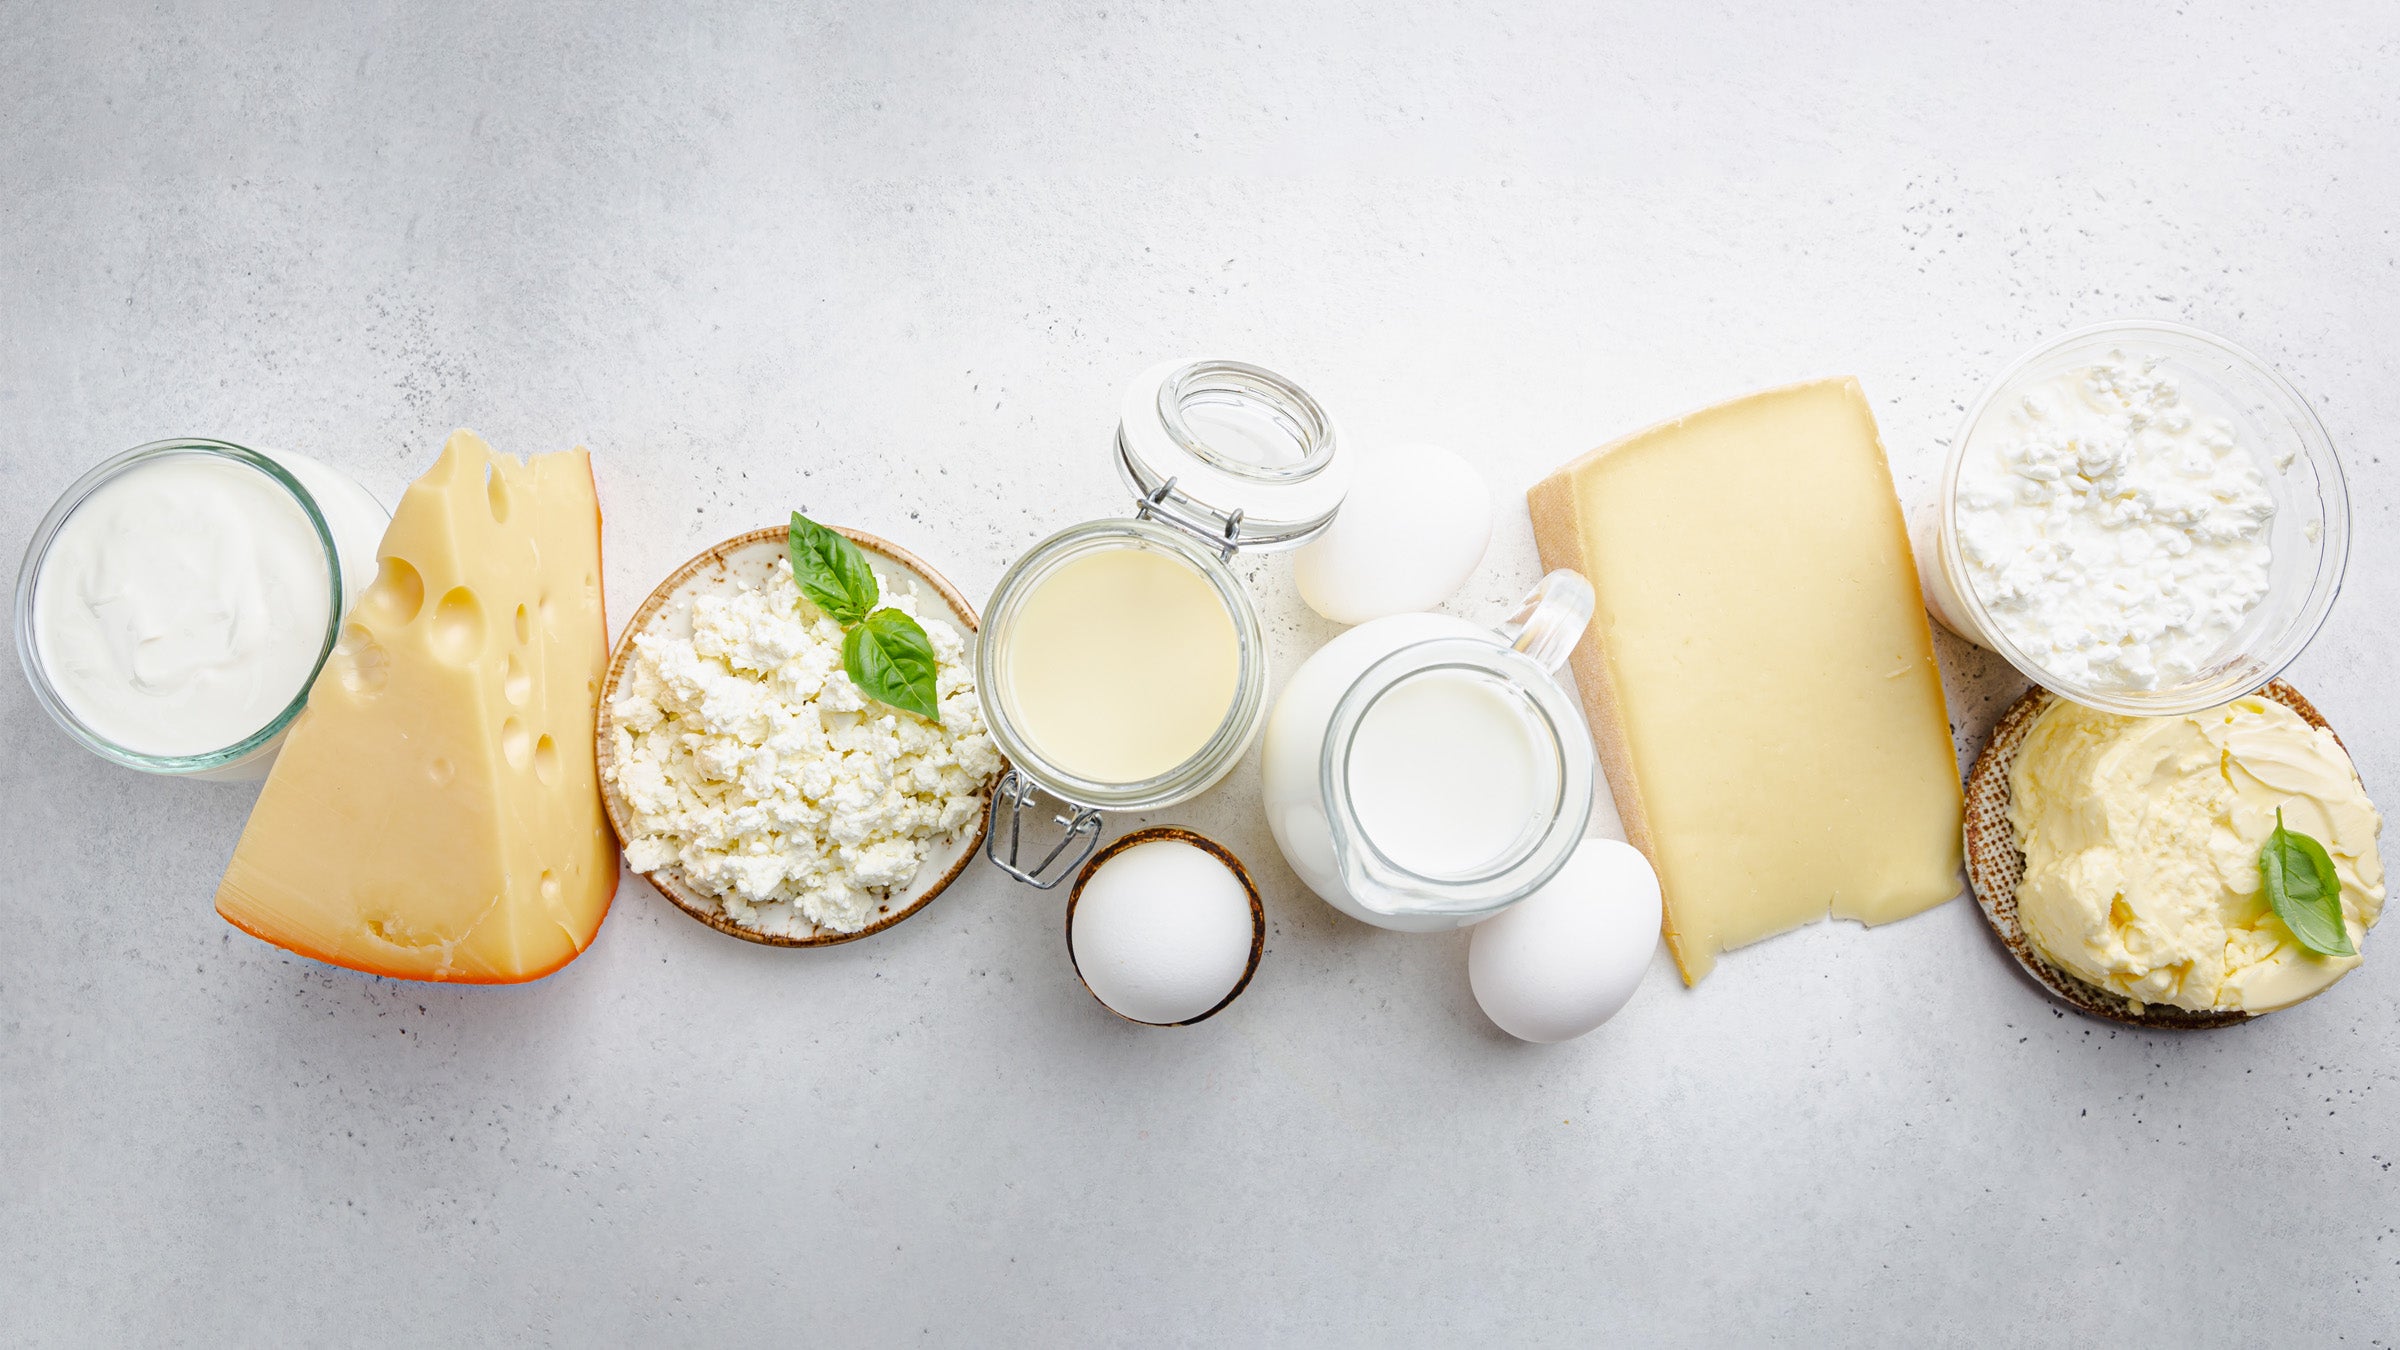 One of the main reasons why dairy products have been implicated in inflammation is their high content of saturated fat. Saturated fat is known to promote inflammation, and dairy products are one of the major dietary sources of this type of fat. Additionally, dairy products, particularly milk, contain a sugar called lactose, which may also contribute to inflammation in some individuals.